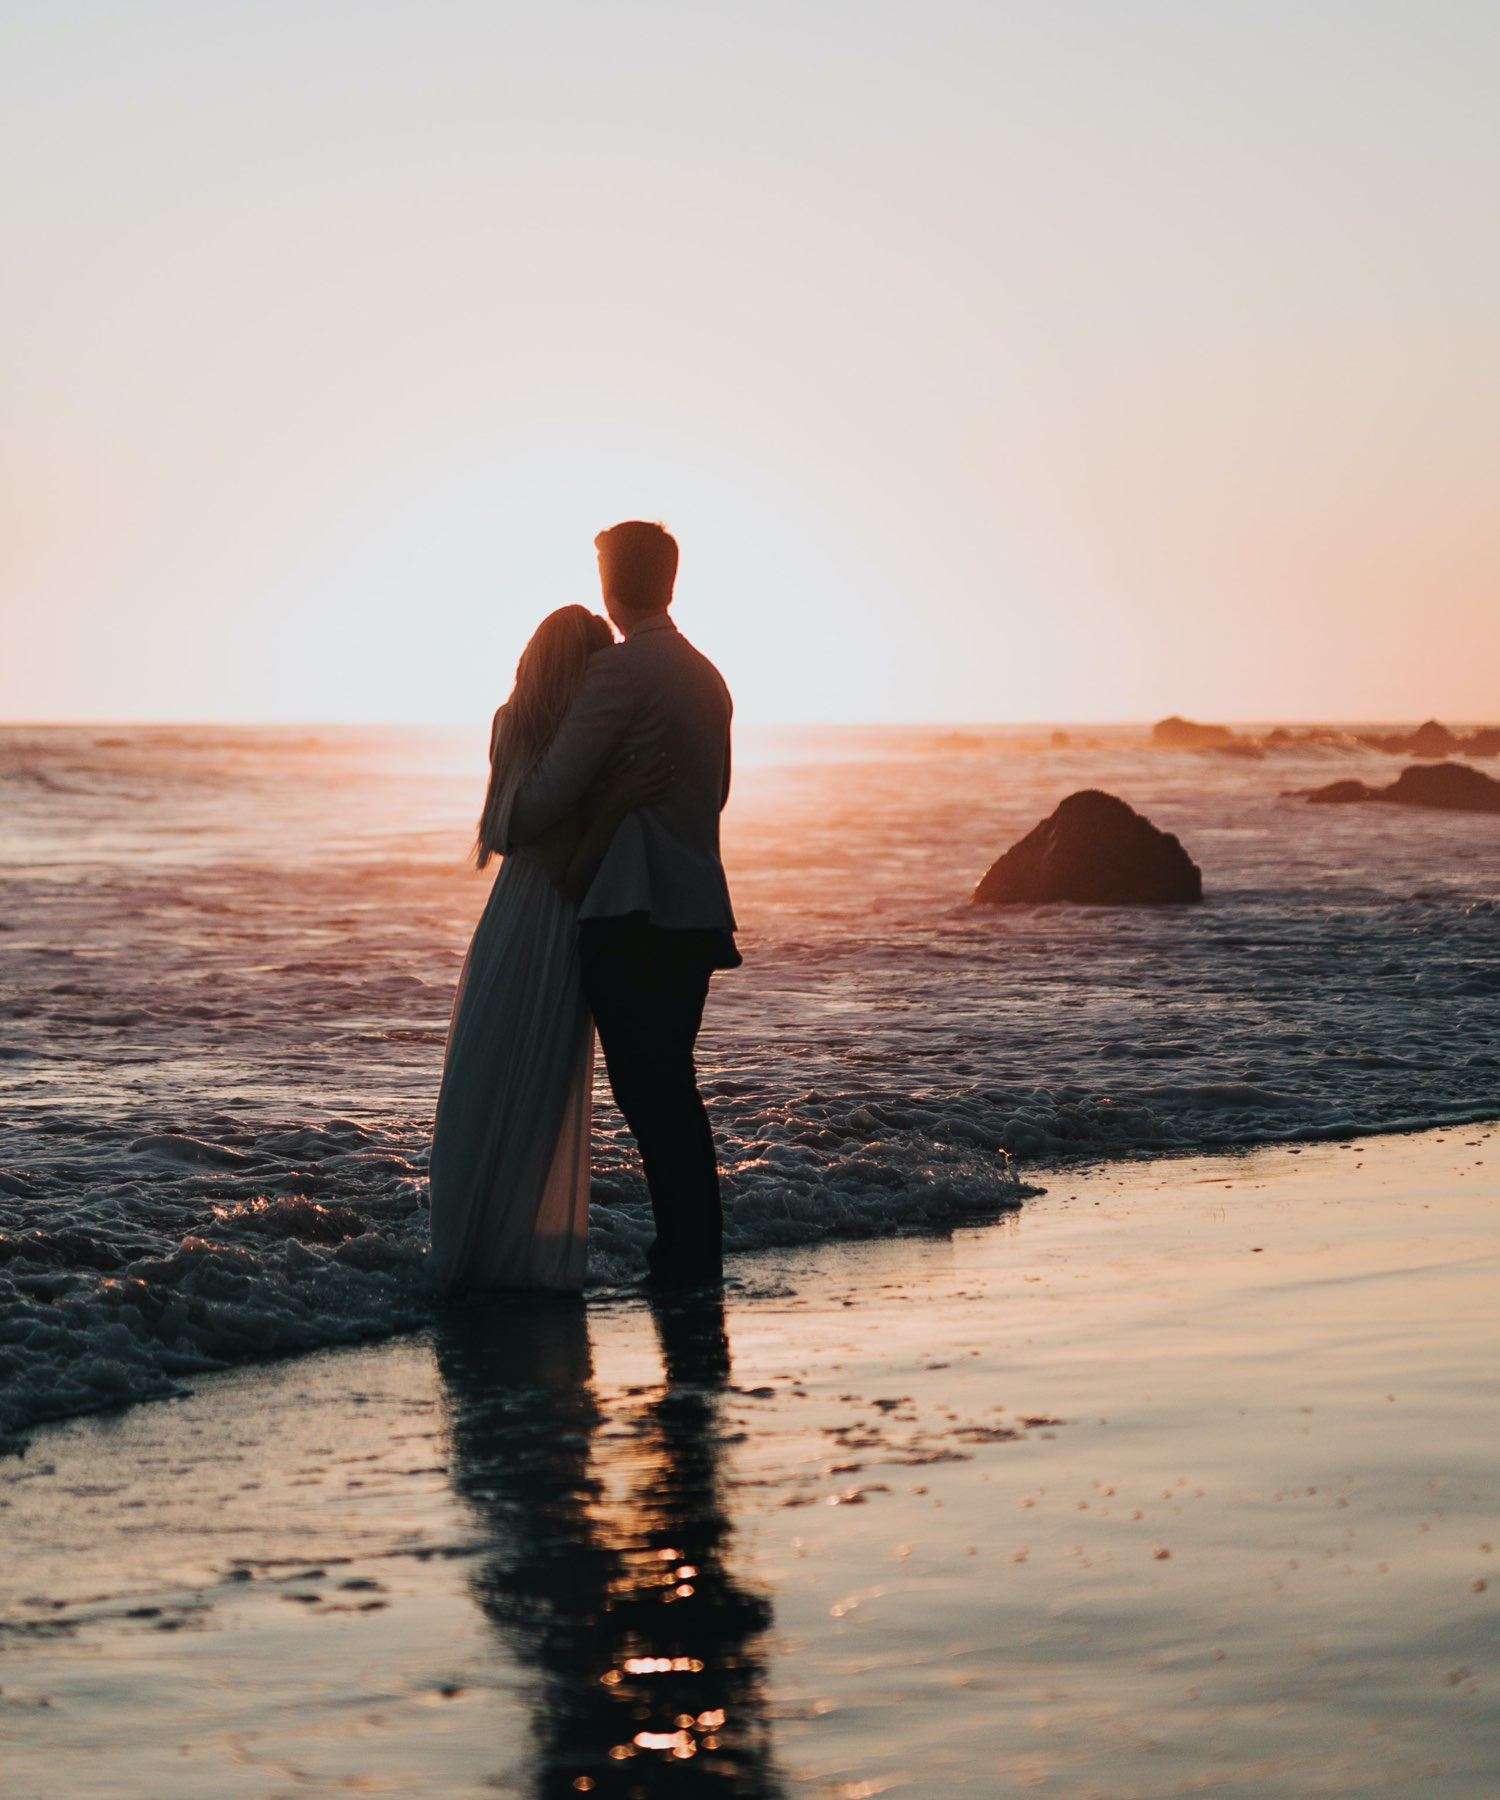 Сouple wearing a white gown and a black suit on the beach. Mobile image